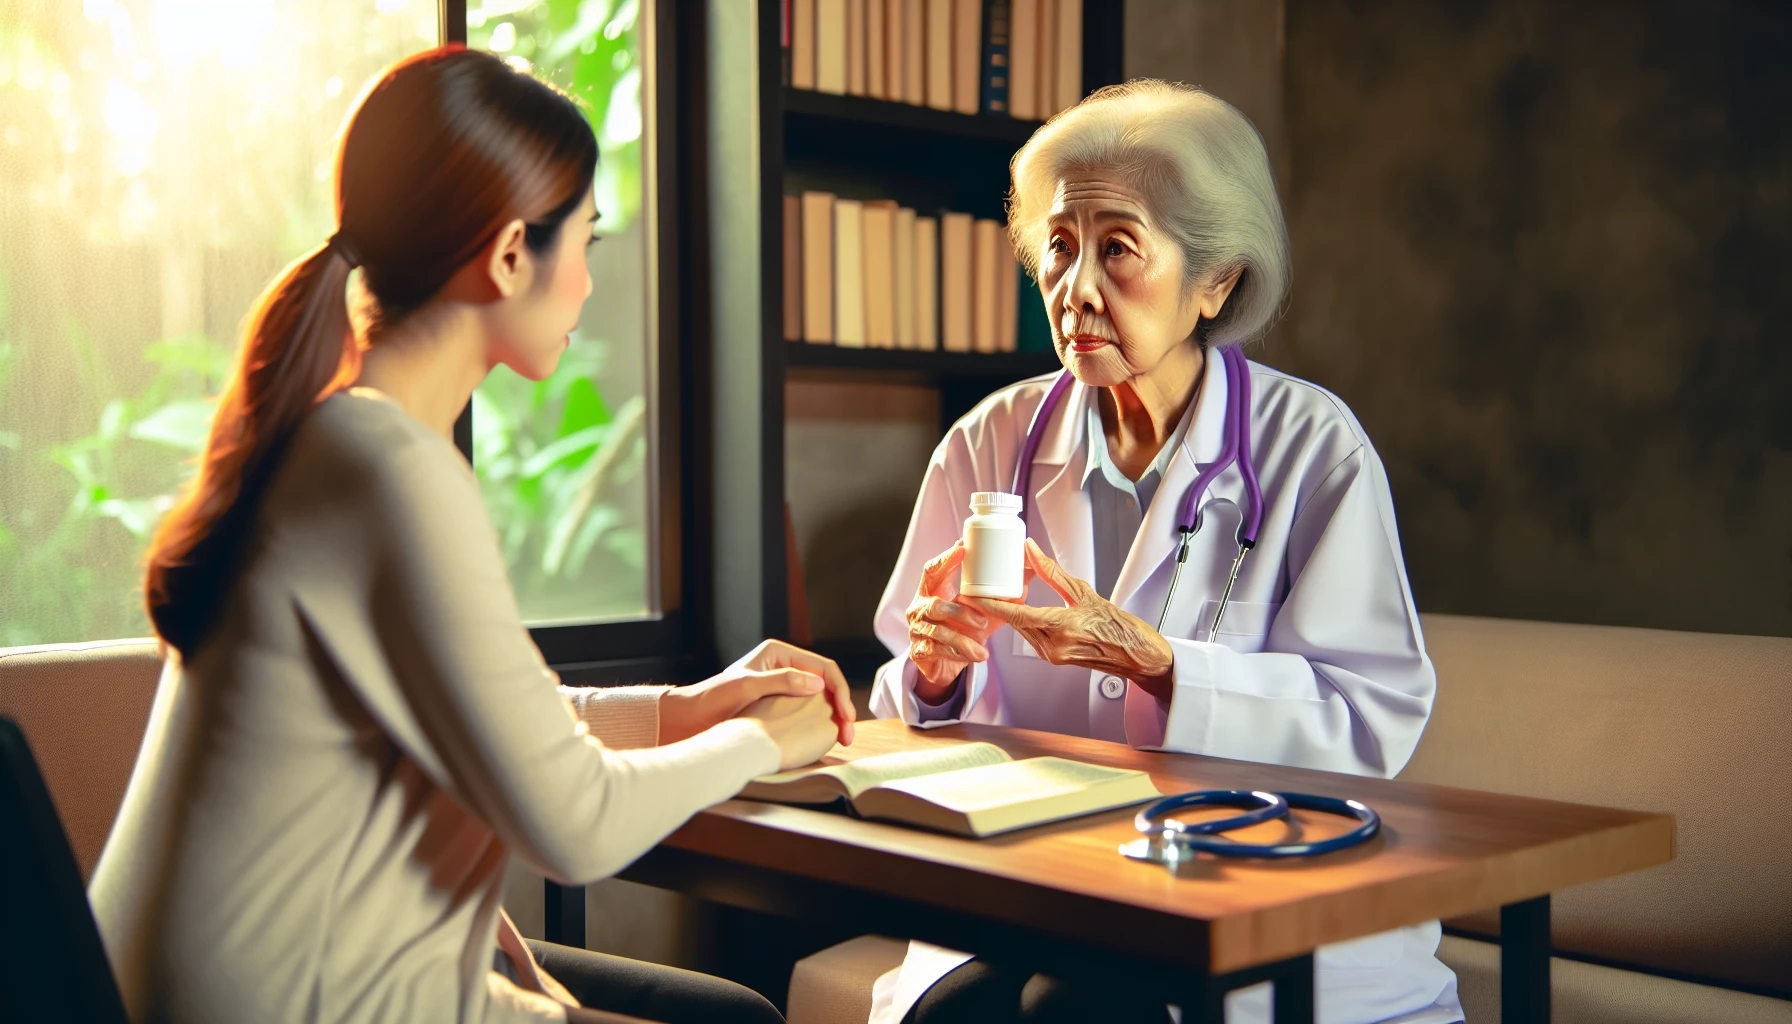 A senior person consulting with a healthcare provider